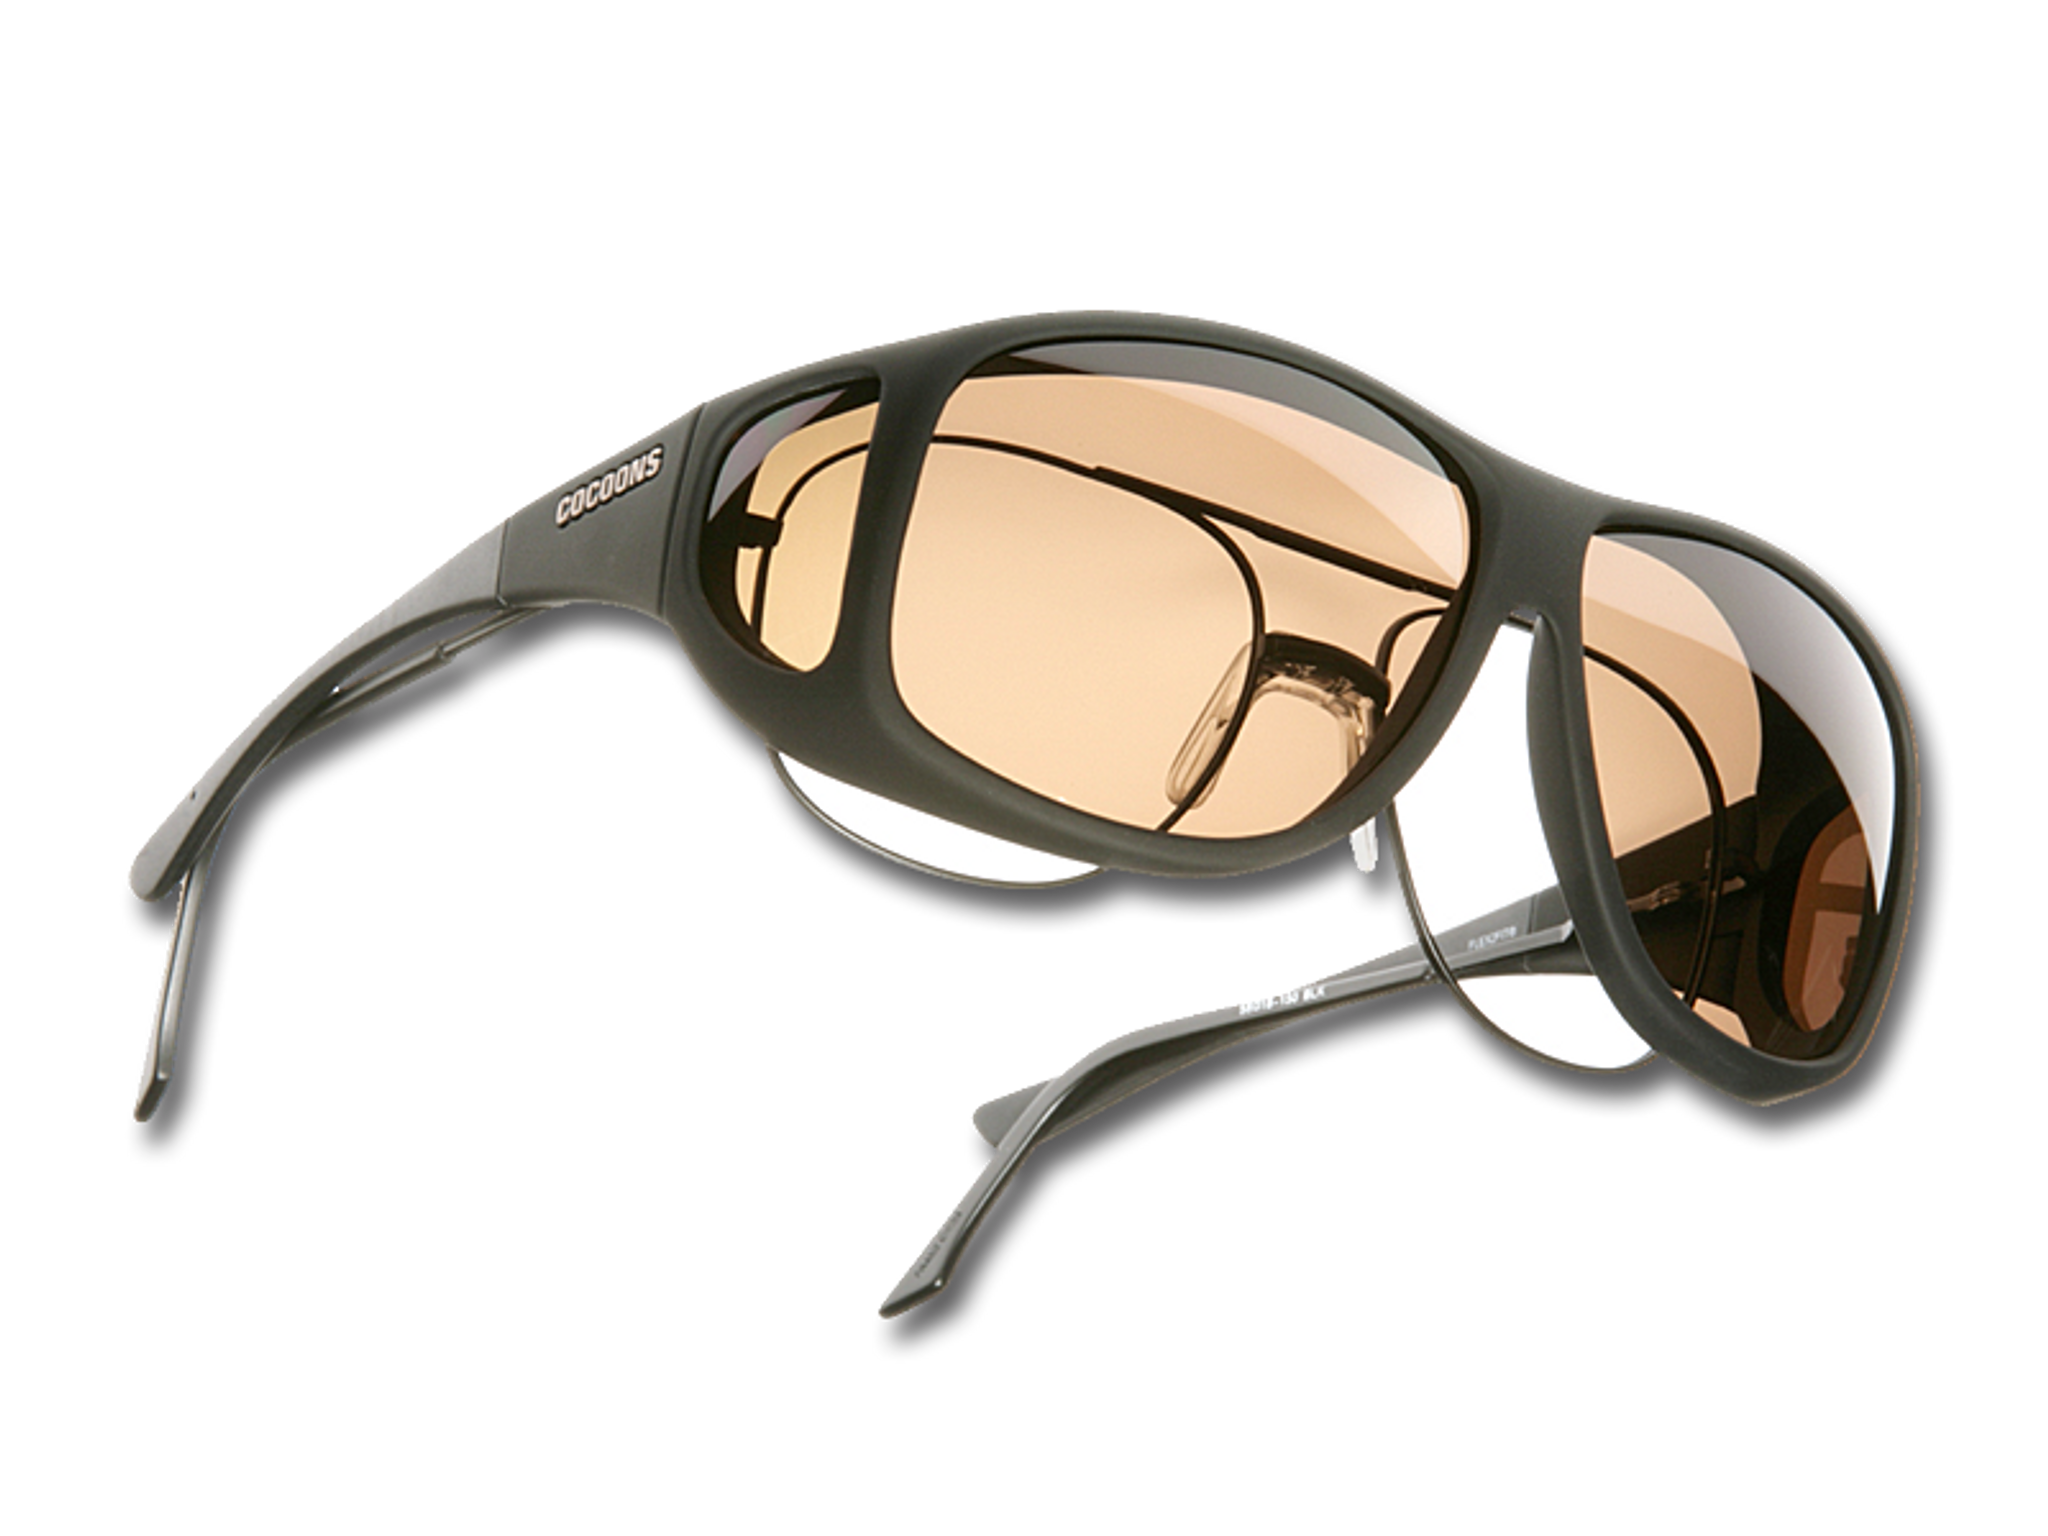 Cocoons OveRx Polarized Photochromic Sunglasses at The Shop